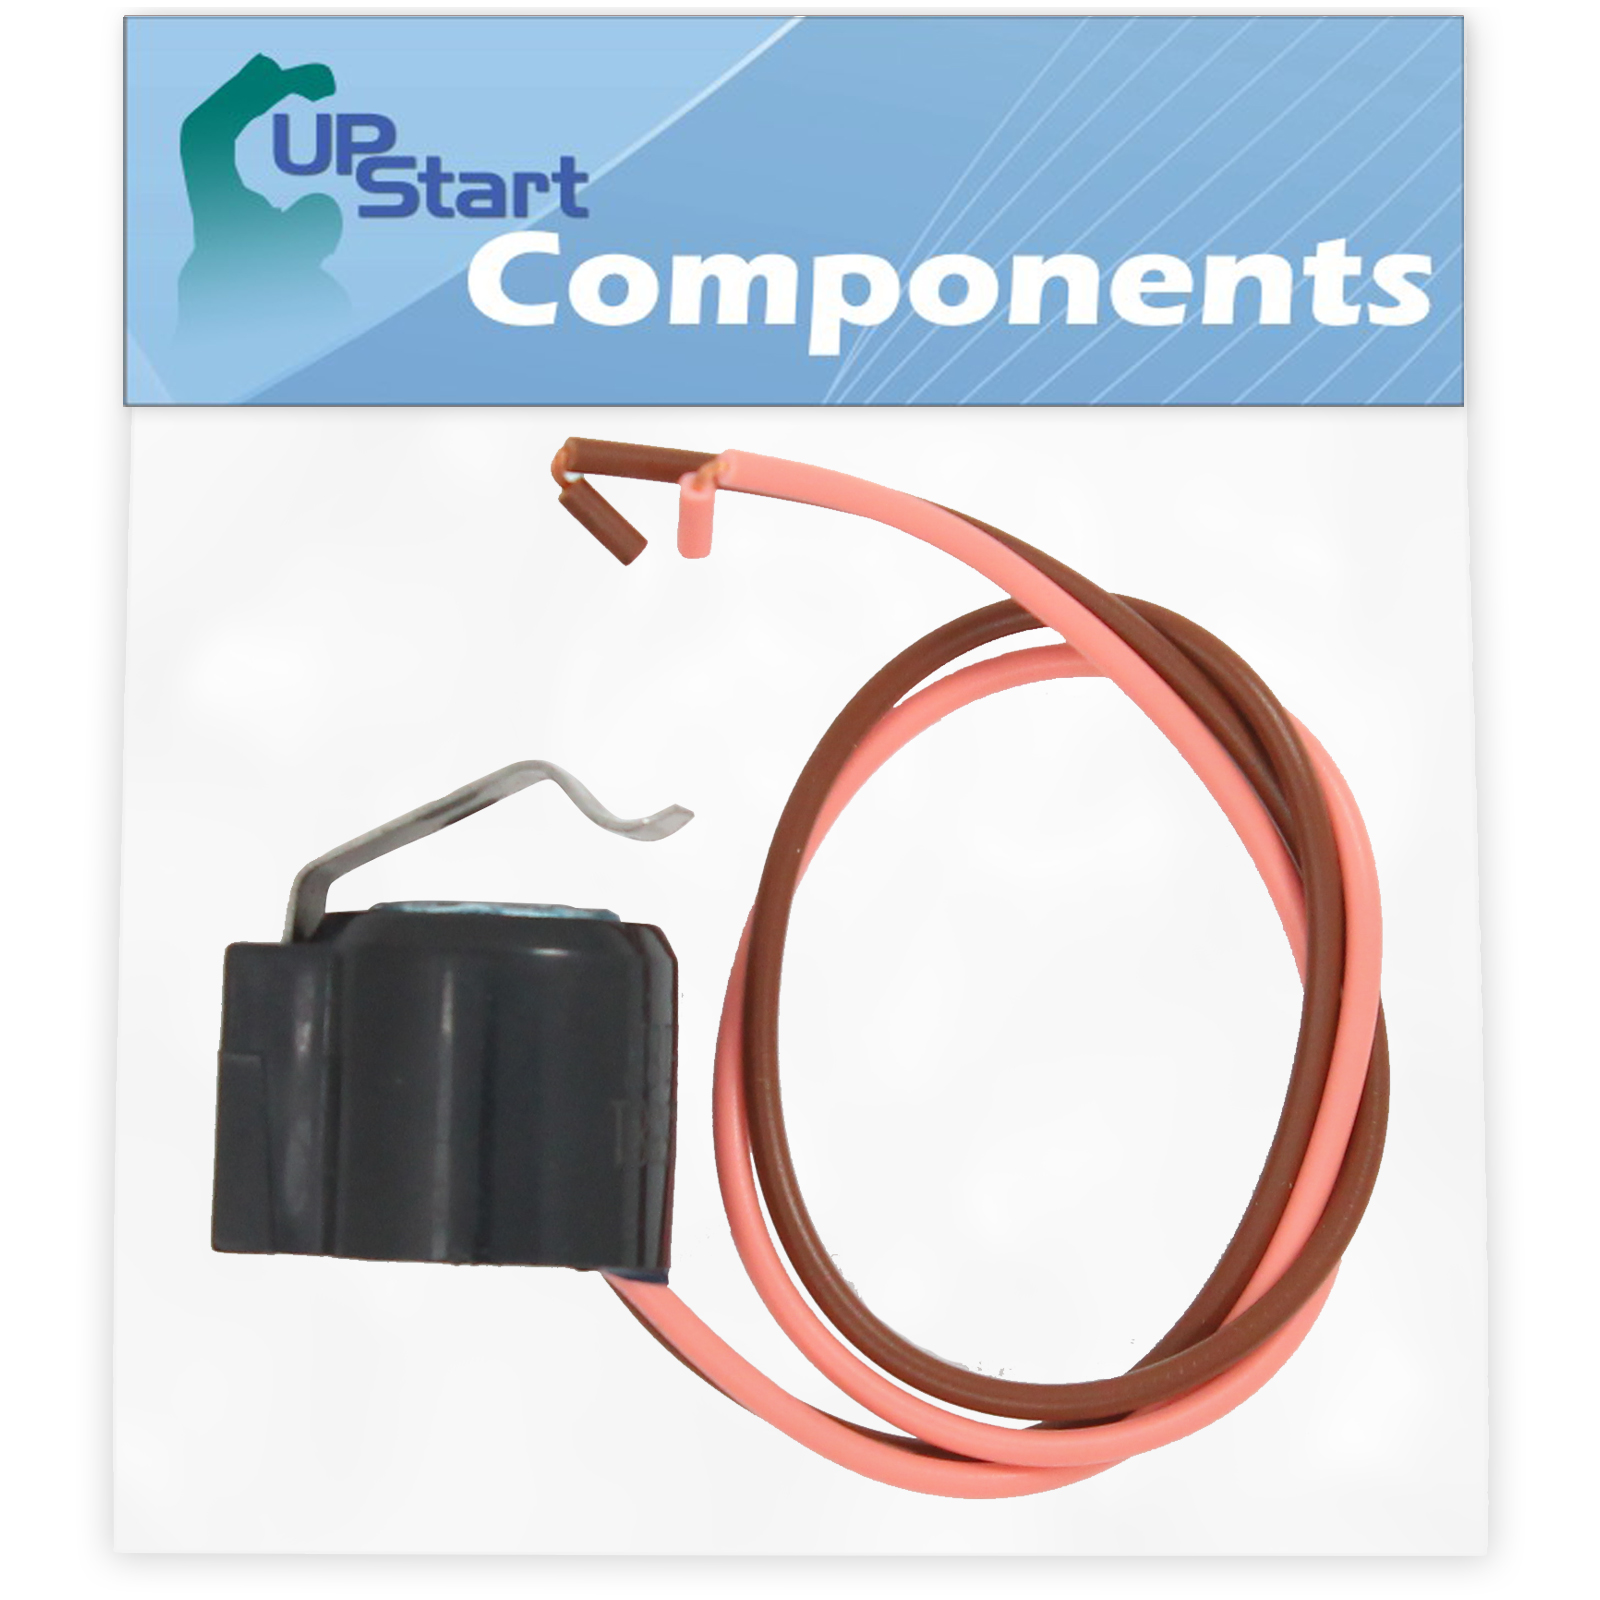 W10225581 Defrost Thermostat Replacement for Whirlpool 3ED22DQXDN00 Refrigerator - Compatible with W10225581 Defrost Bimetal Thermostat - UpStart Components Brand - image 1 of 2